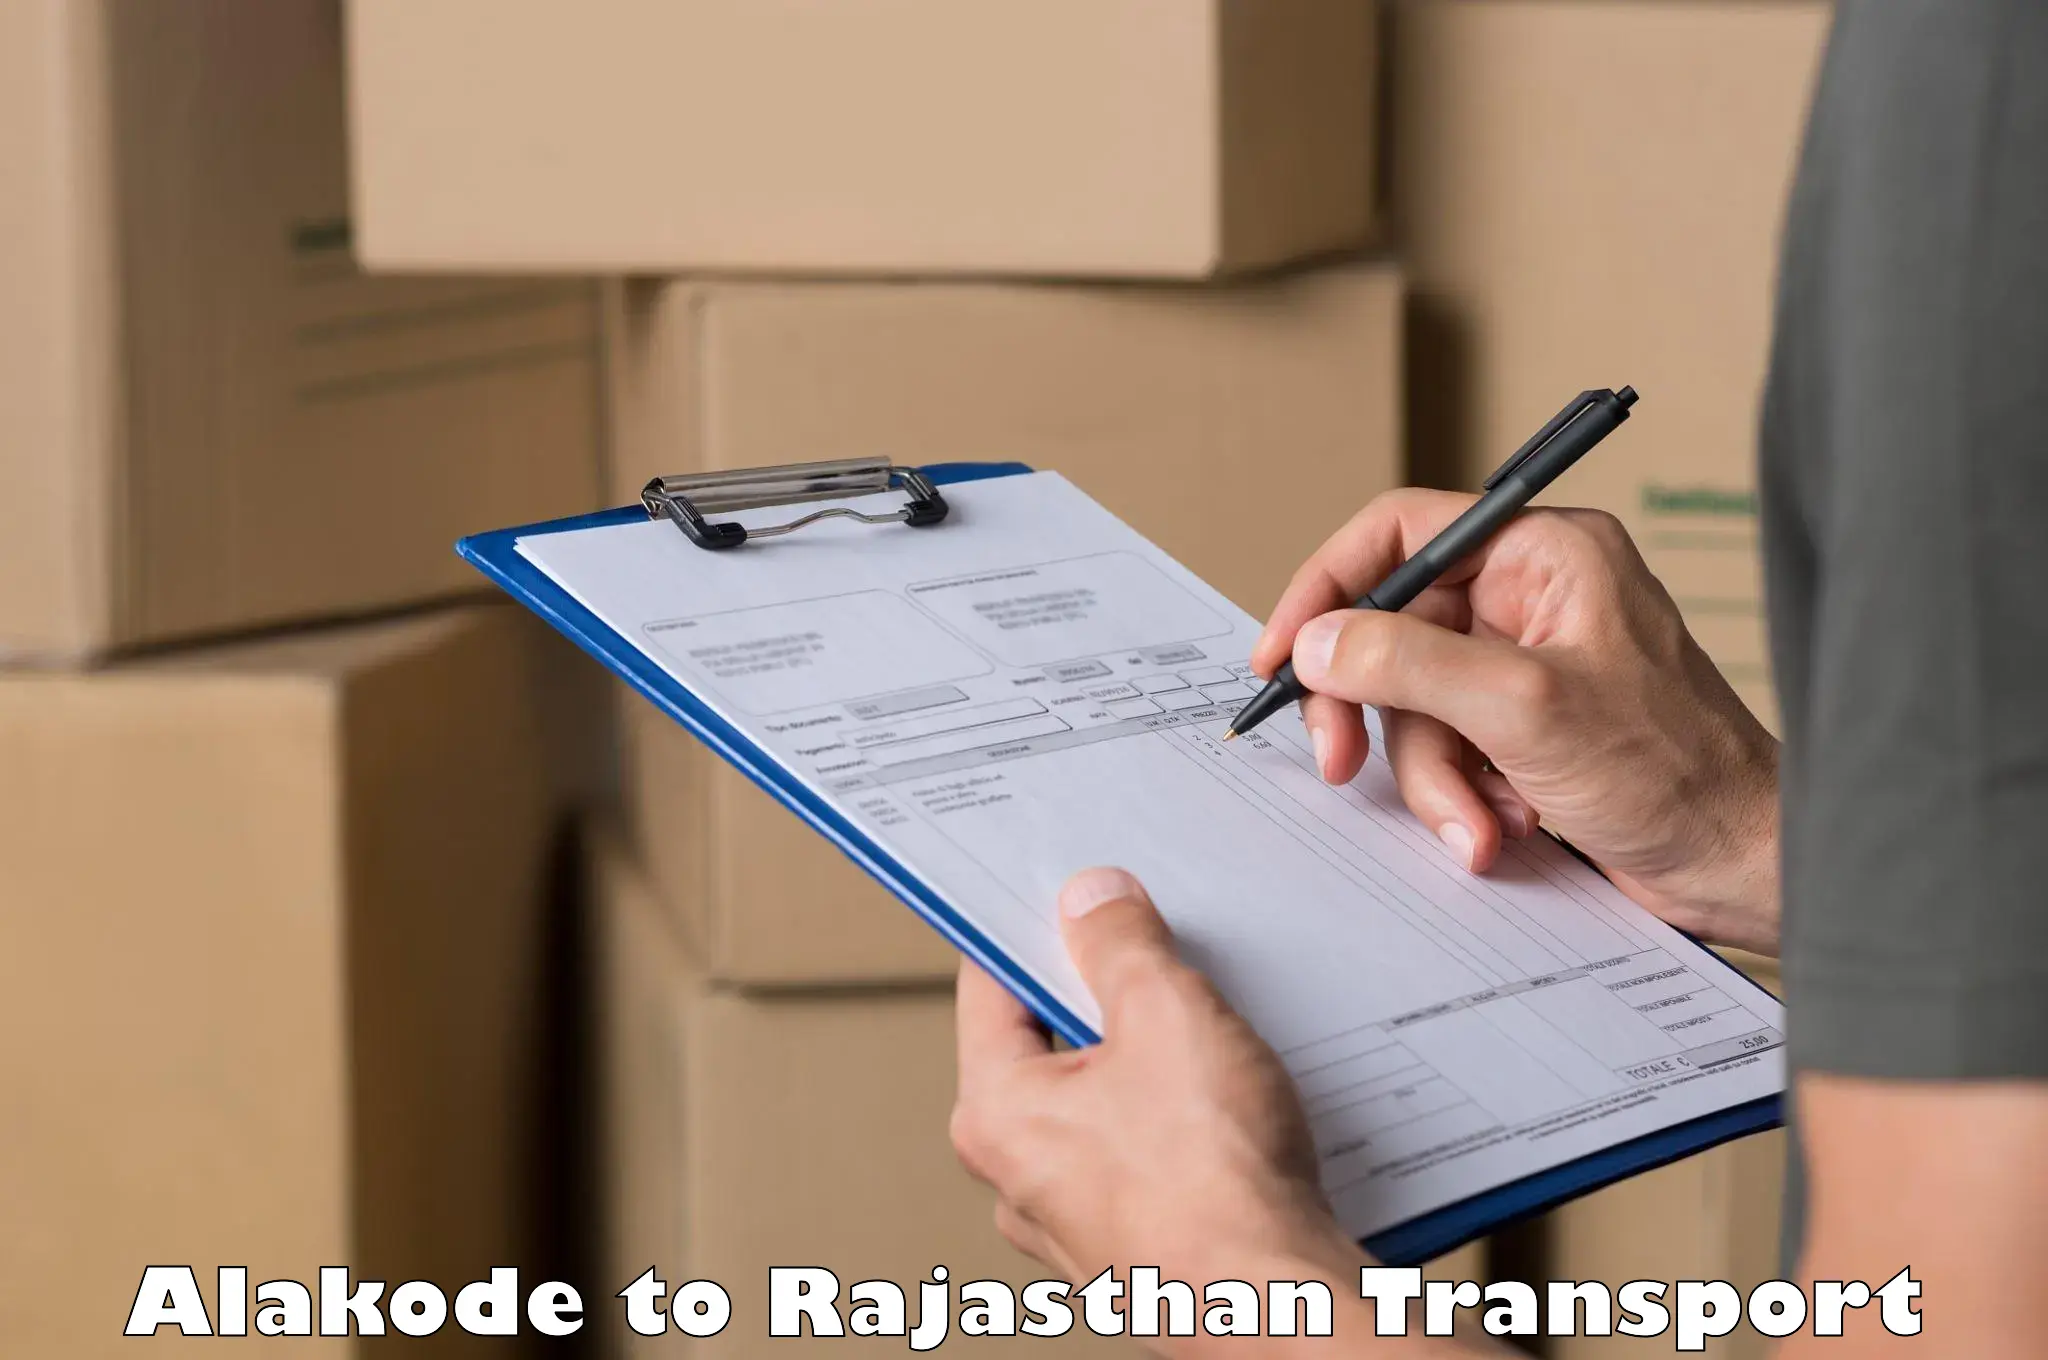 Container transportation services Alakode to Rajgarh Rajasthan